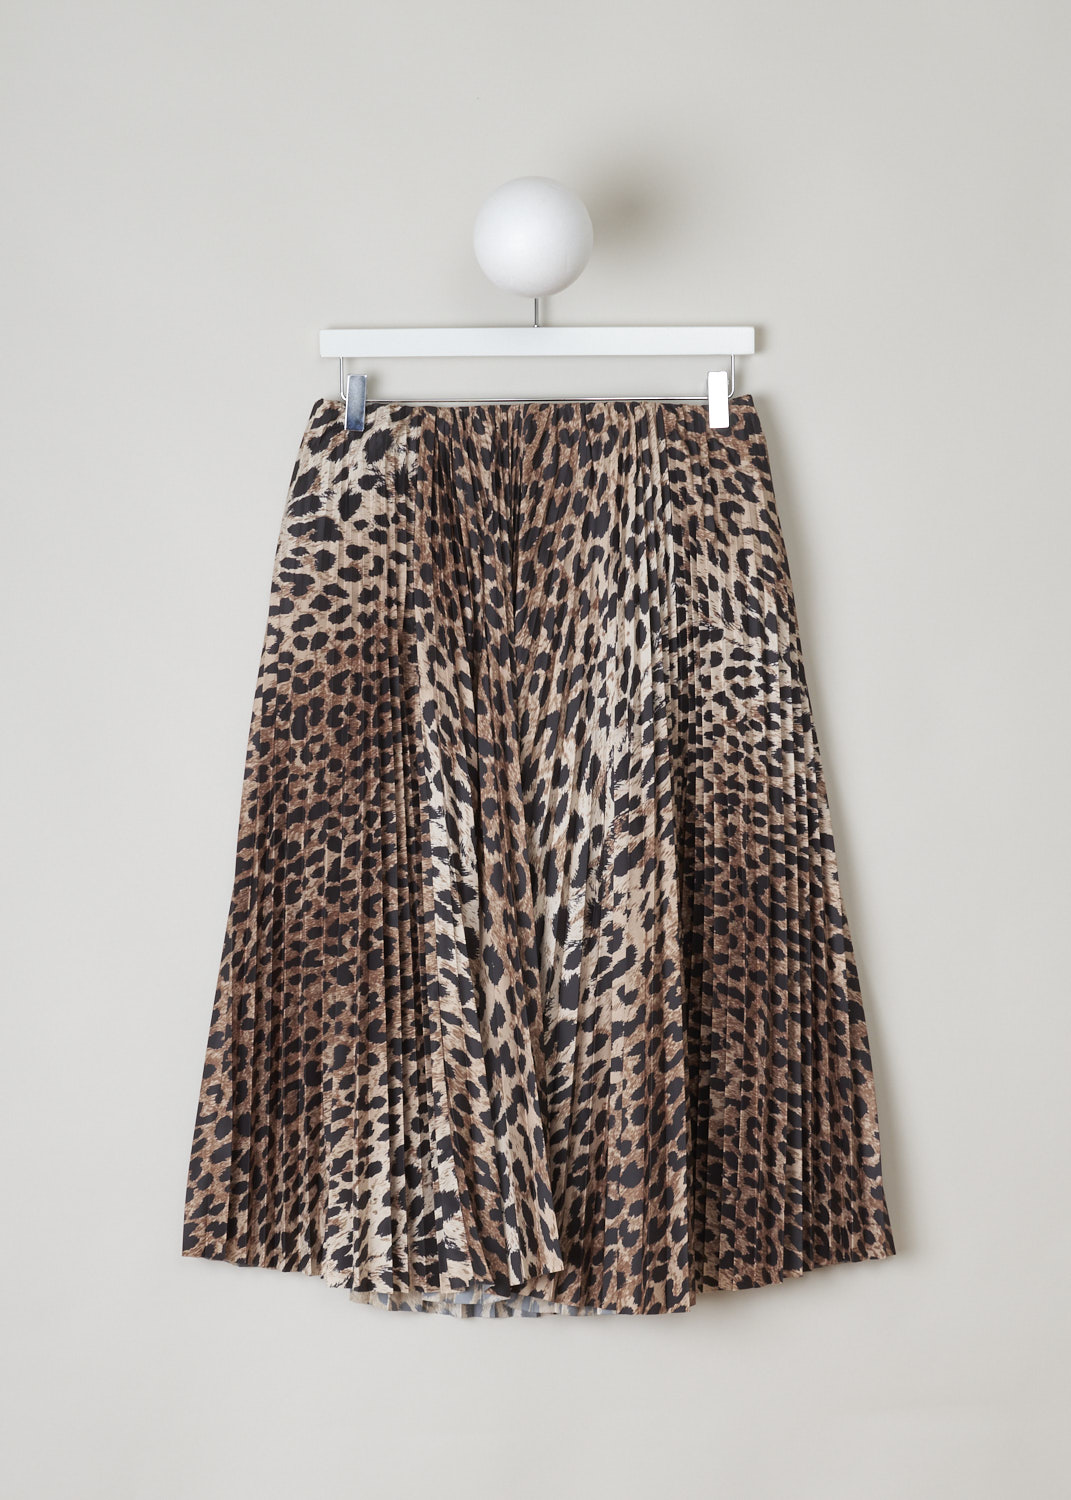 Balenciaga, Accordion pleated leopard print skirt, 601196_TGL35_9501, brown, beige, black, front Mid-length accordion skirt, printed to a multi-coloured leopard motif. Comes with a broad internal elastic waistband, and has a concealed zipper on the back. 